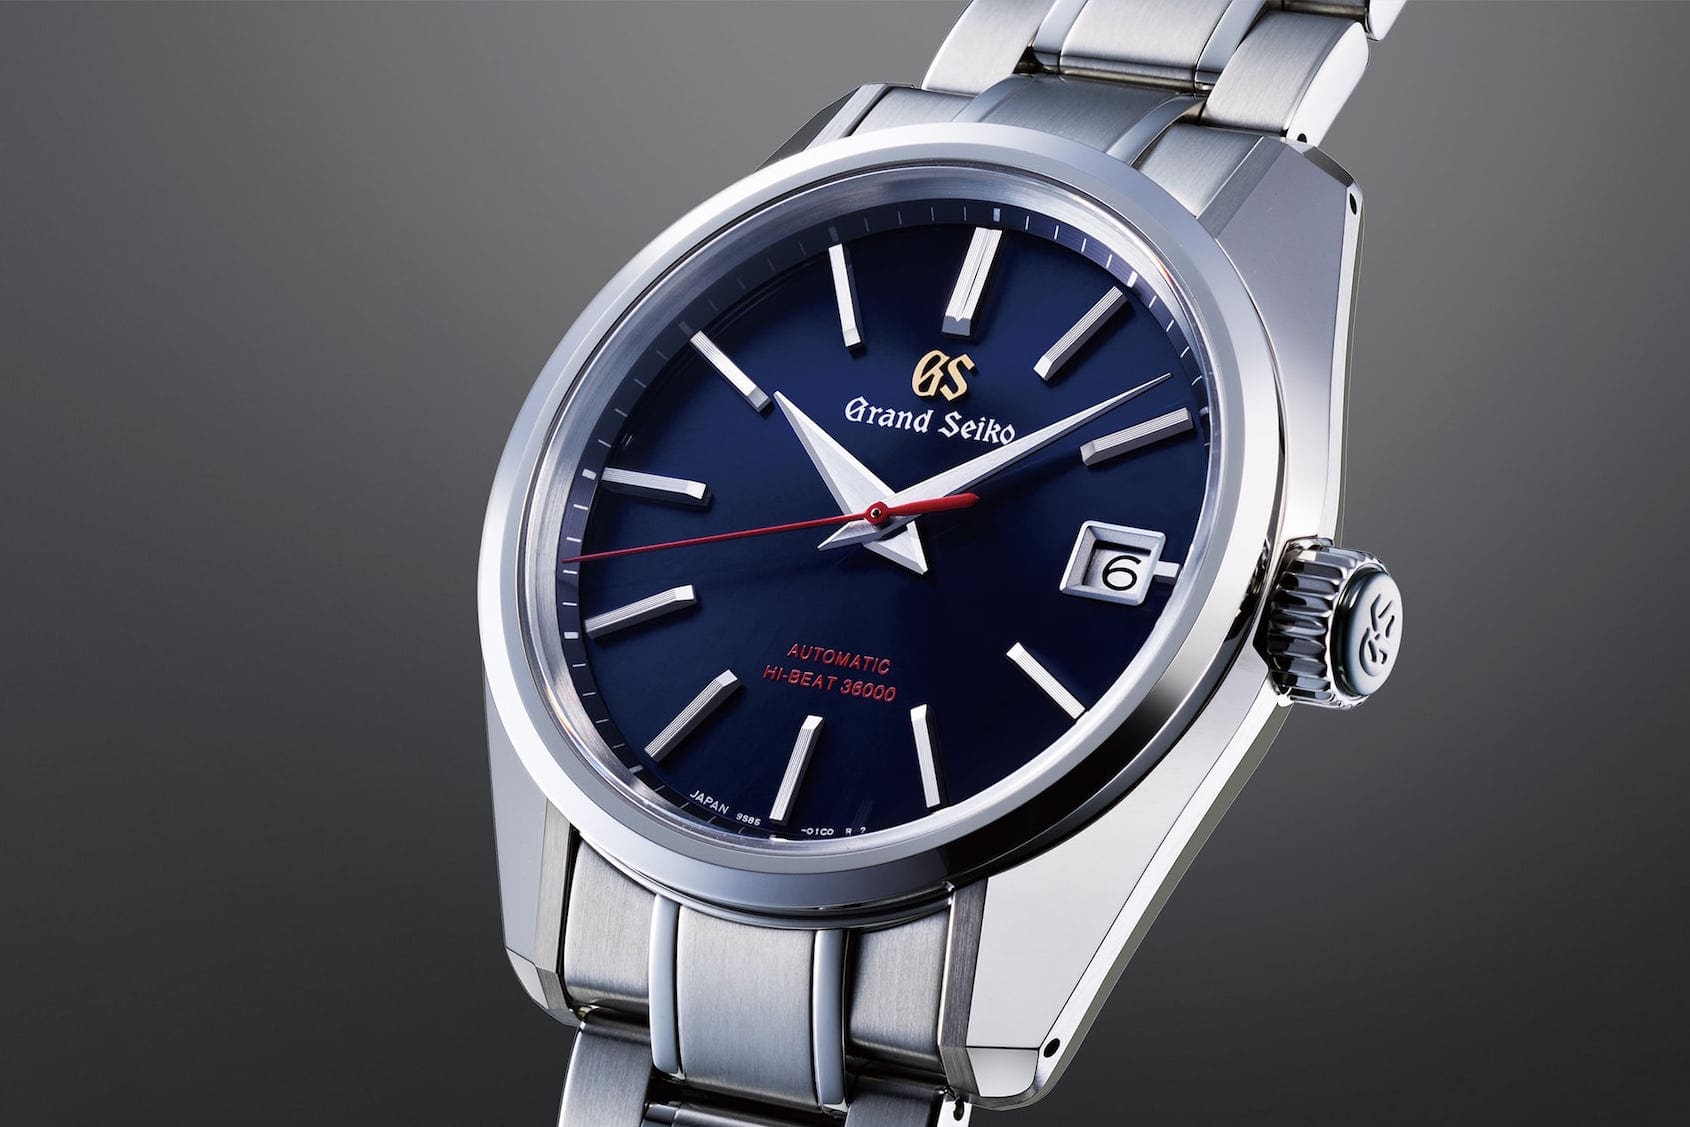 INTRODUCING: The bold and blue Grand Seiko 60th Anniversary